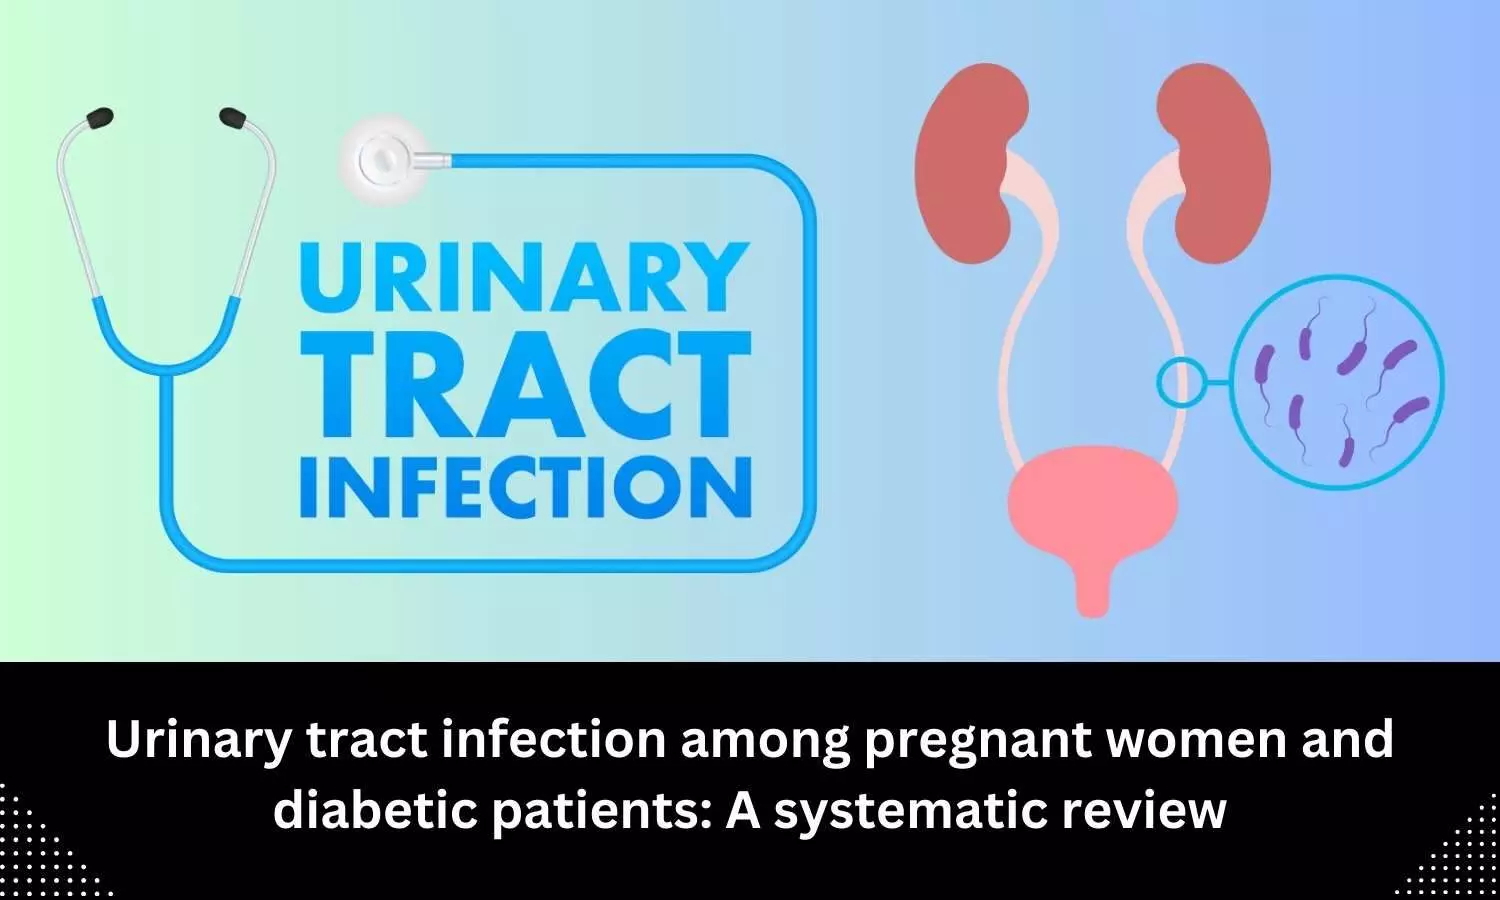 Urinary tract infection among diabetic patients, pregnant women: A systematic review